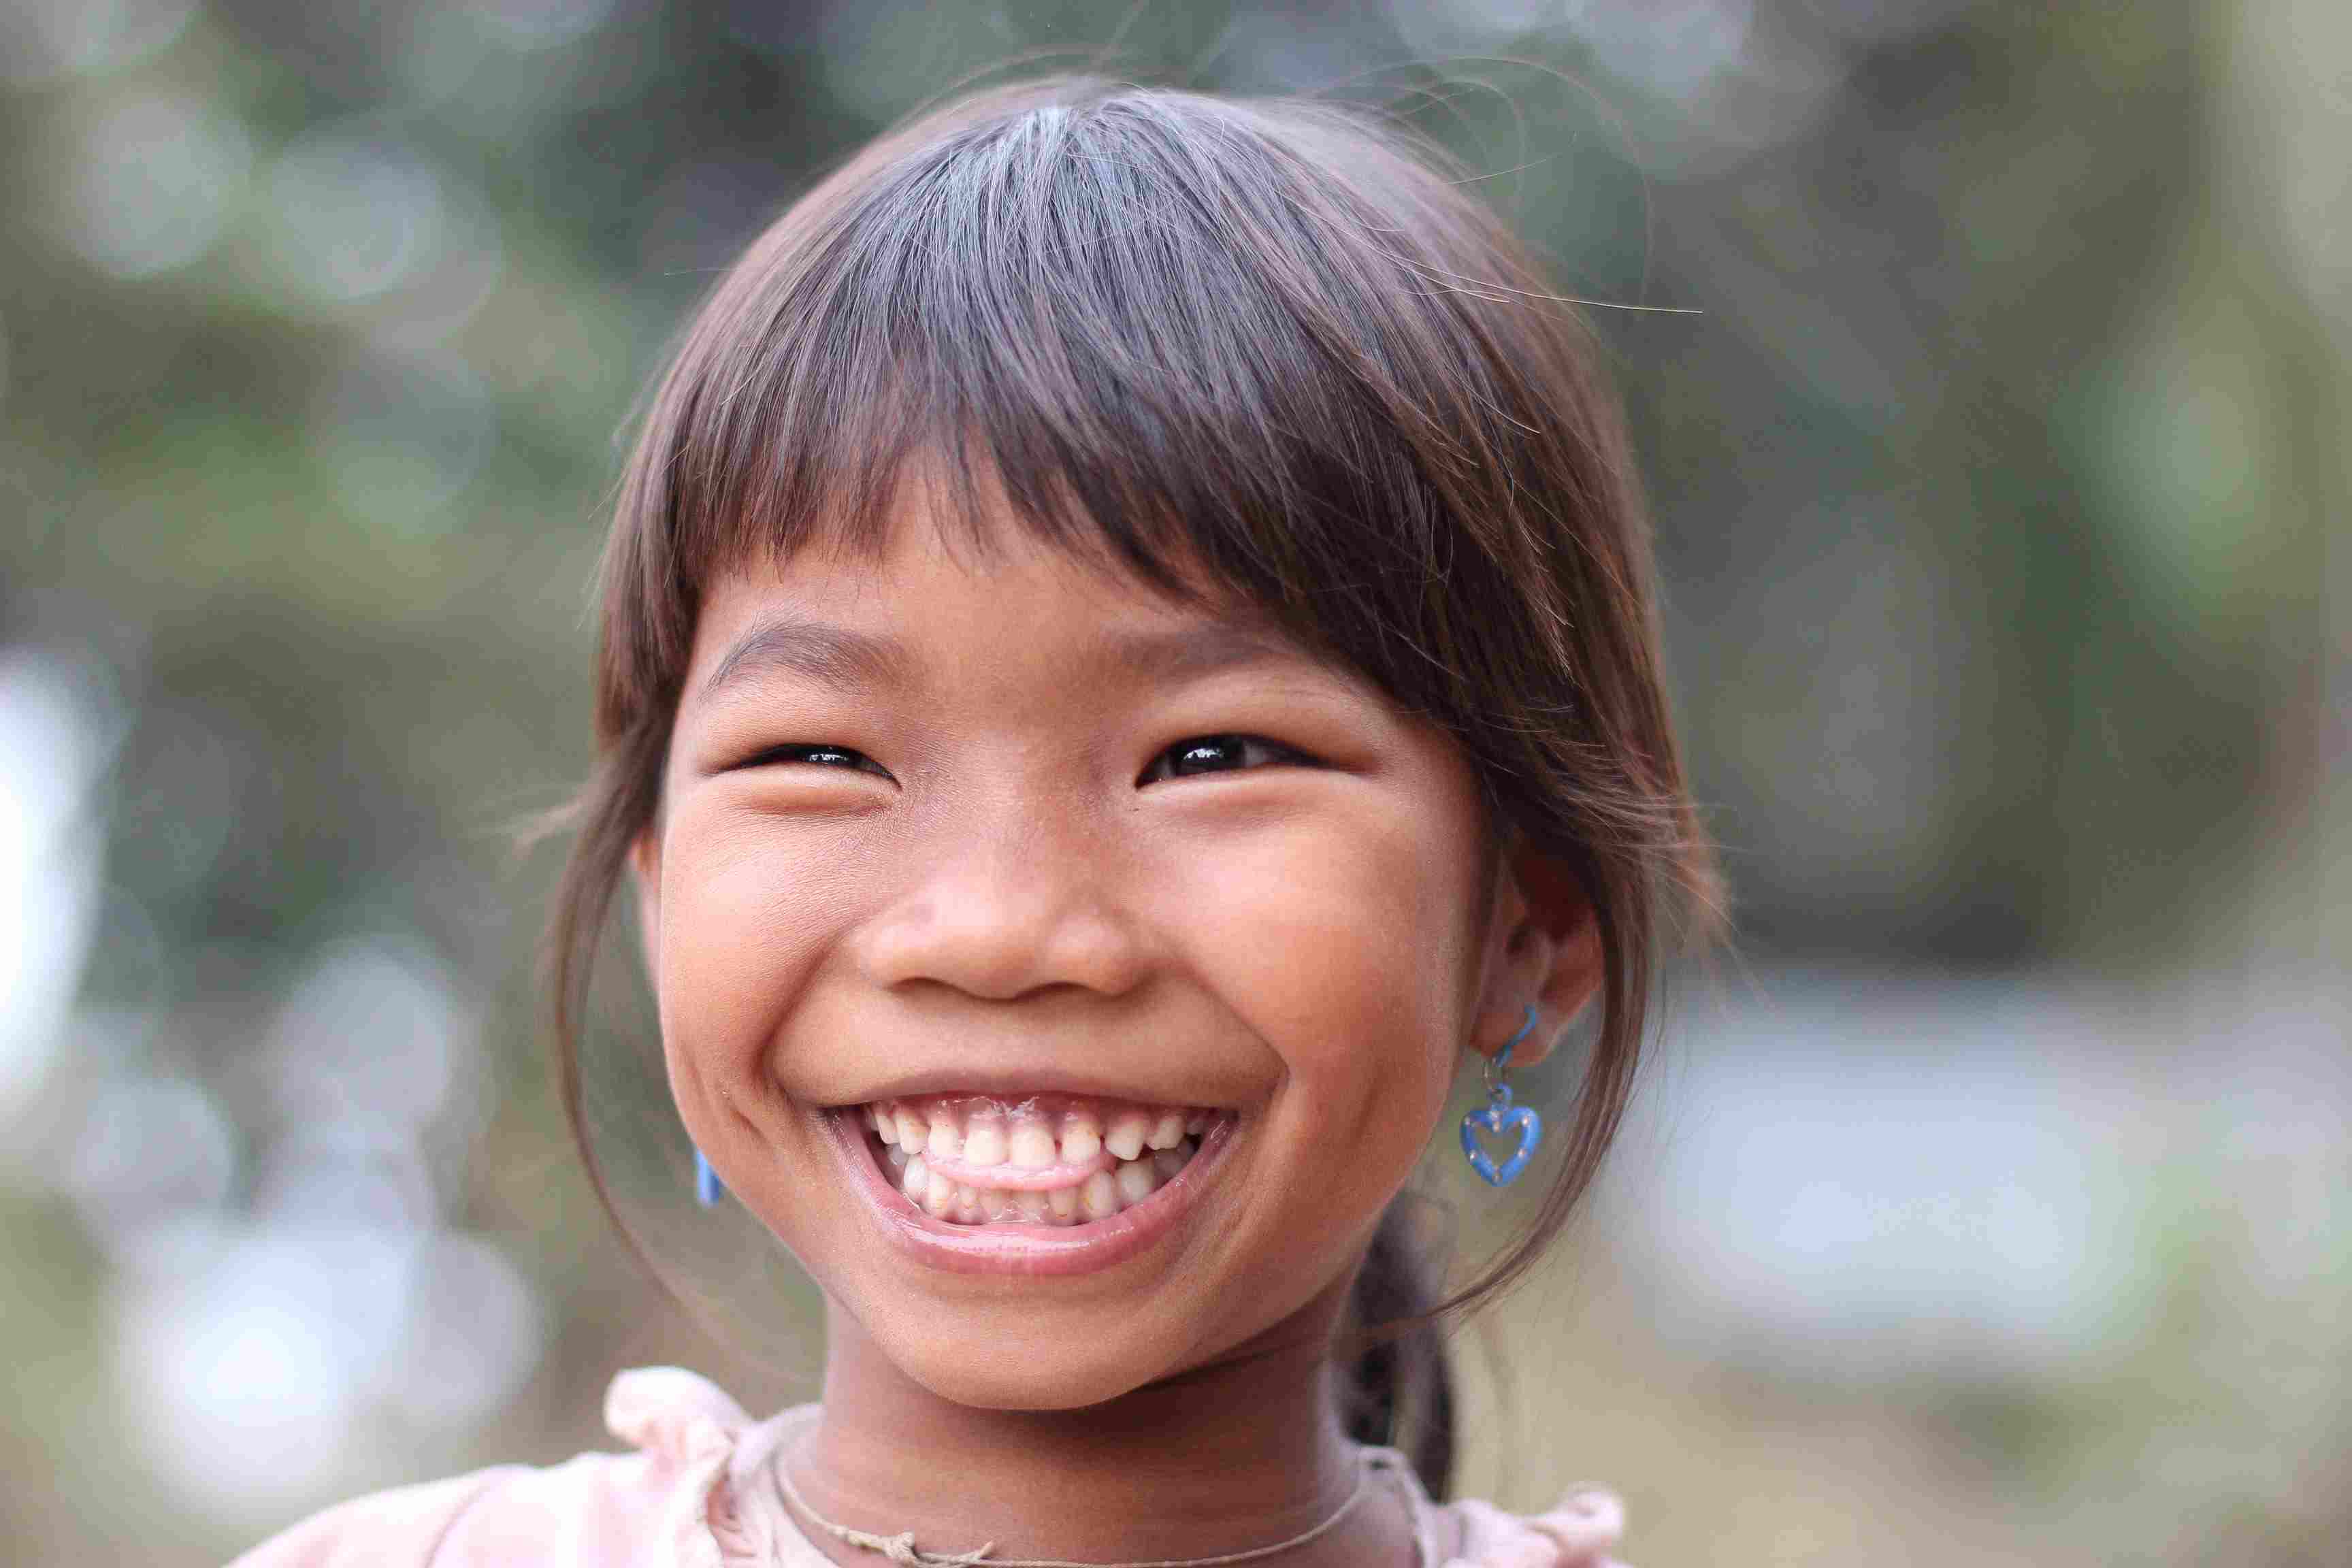 images my ideas 23/23 WC Basile Morin Lao_little_girl_laughing_with_teeth.jpg